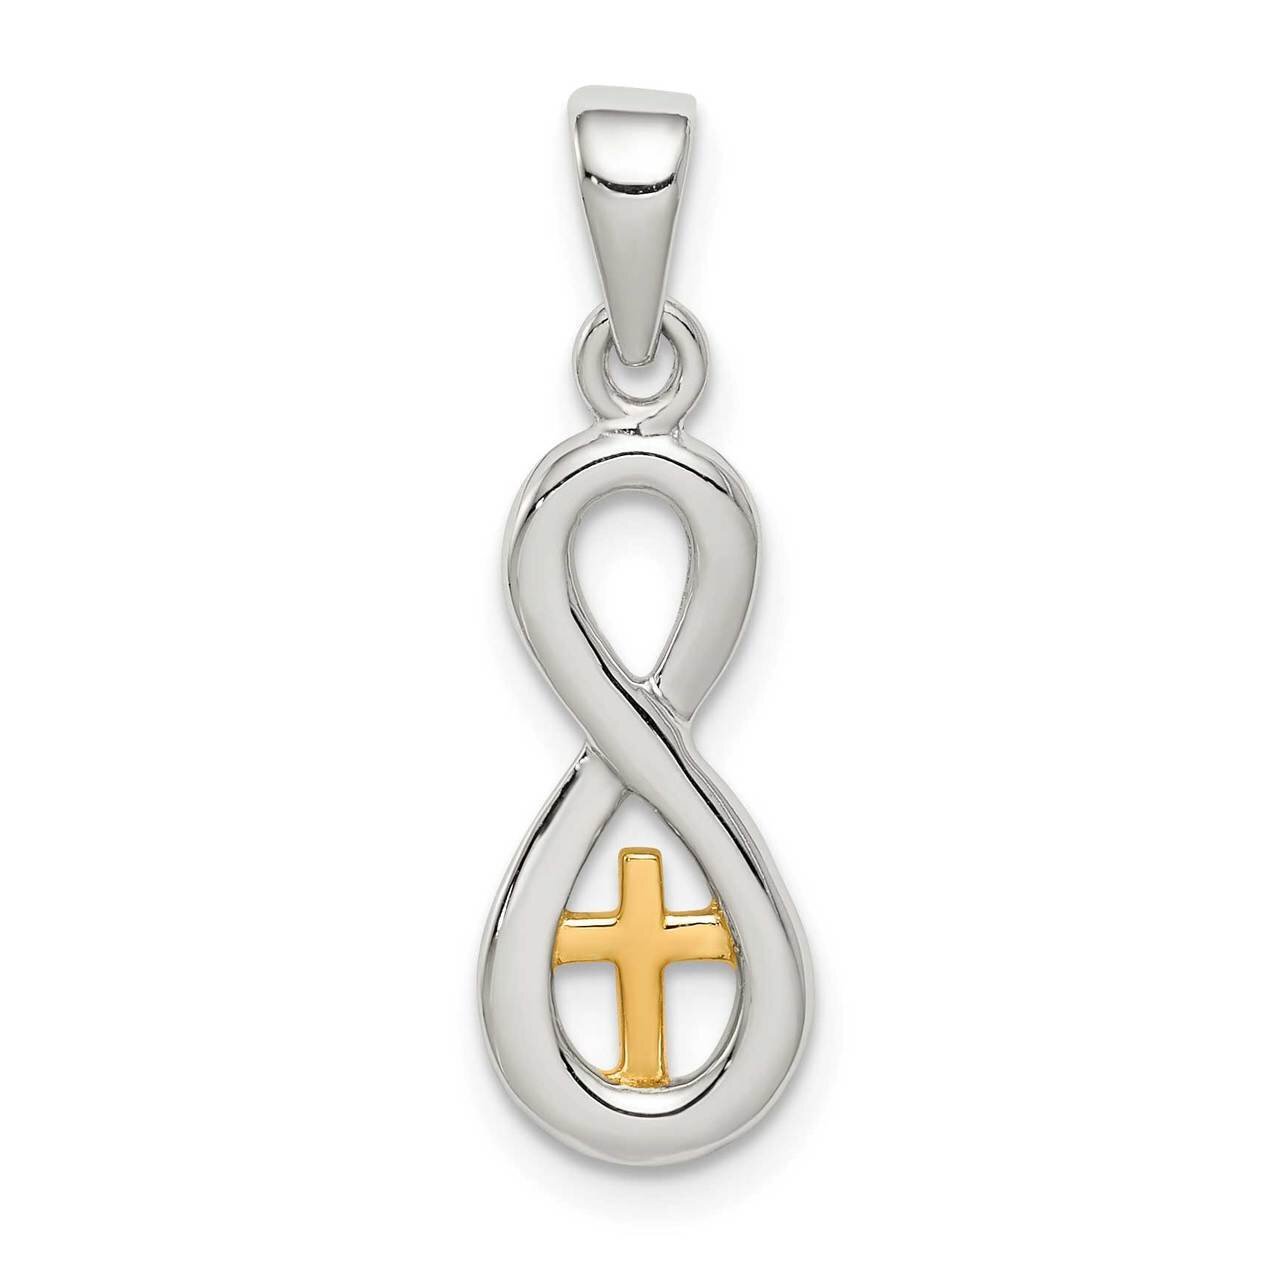 Gold tone Cross Infinity Pendant Sterling Silver QP5296